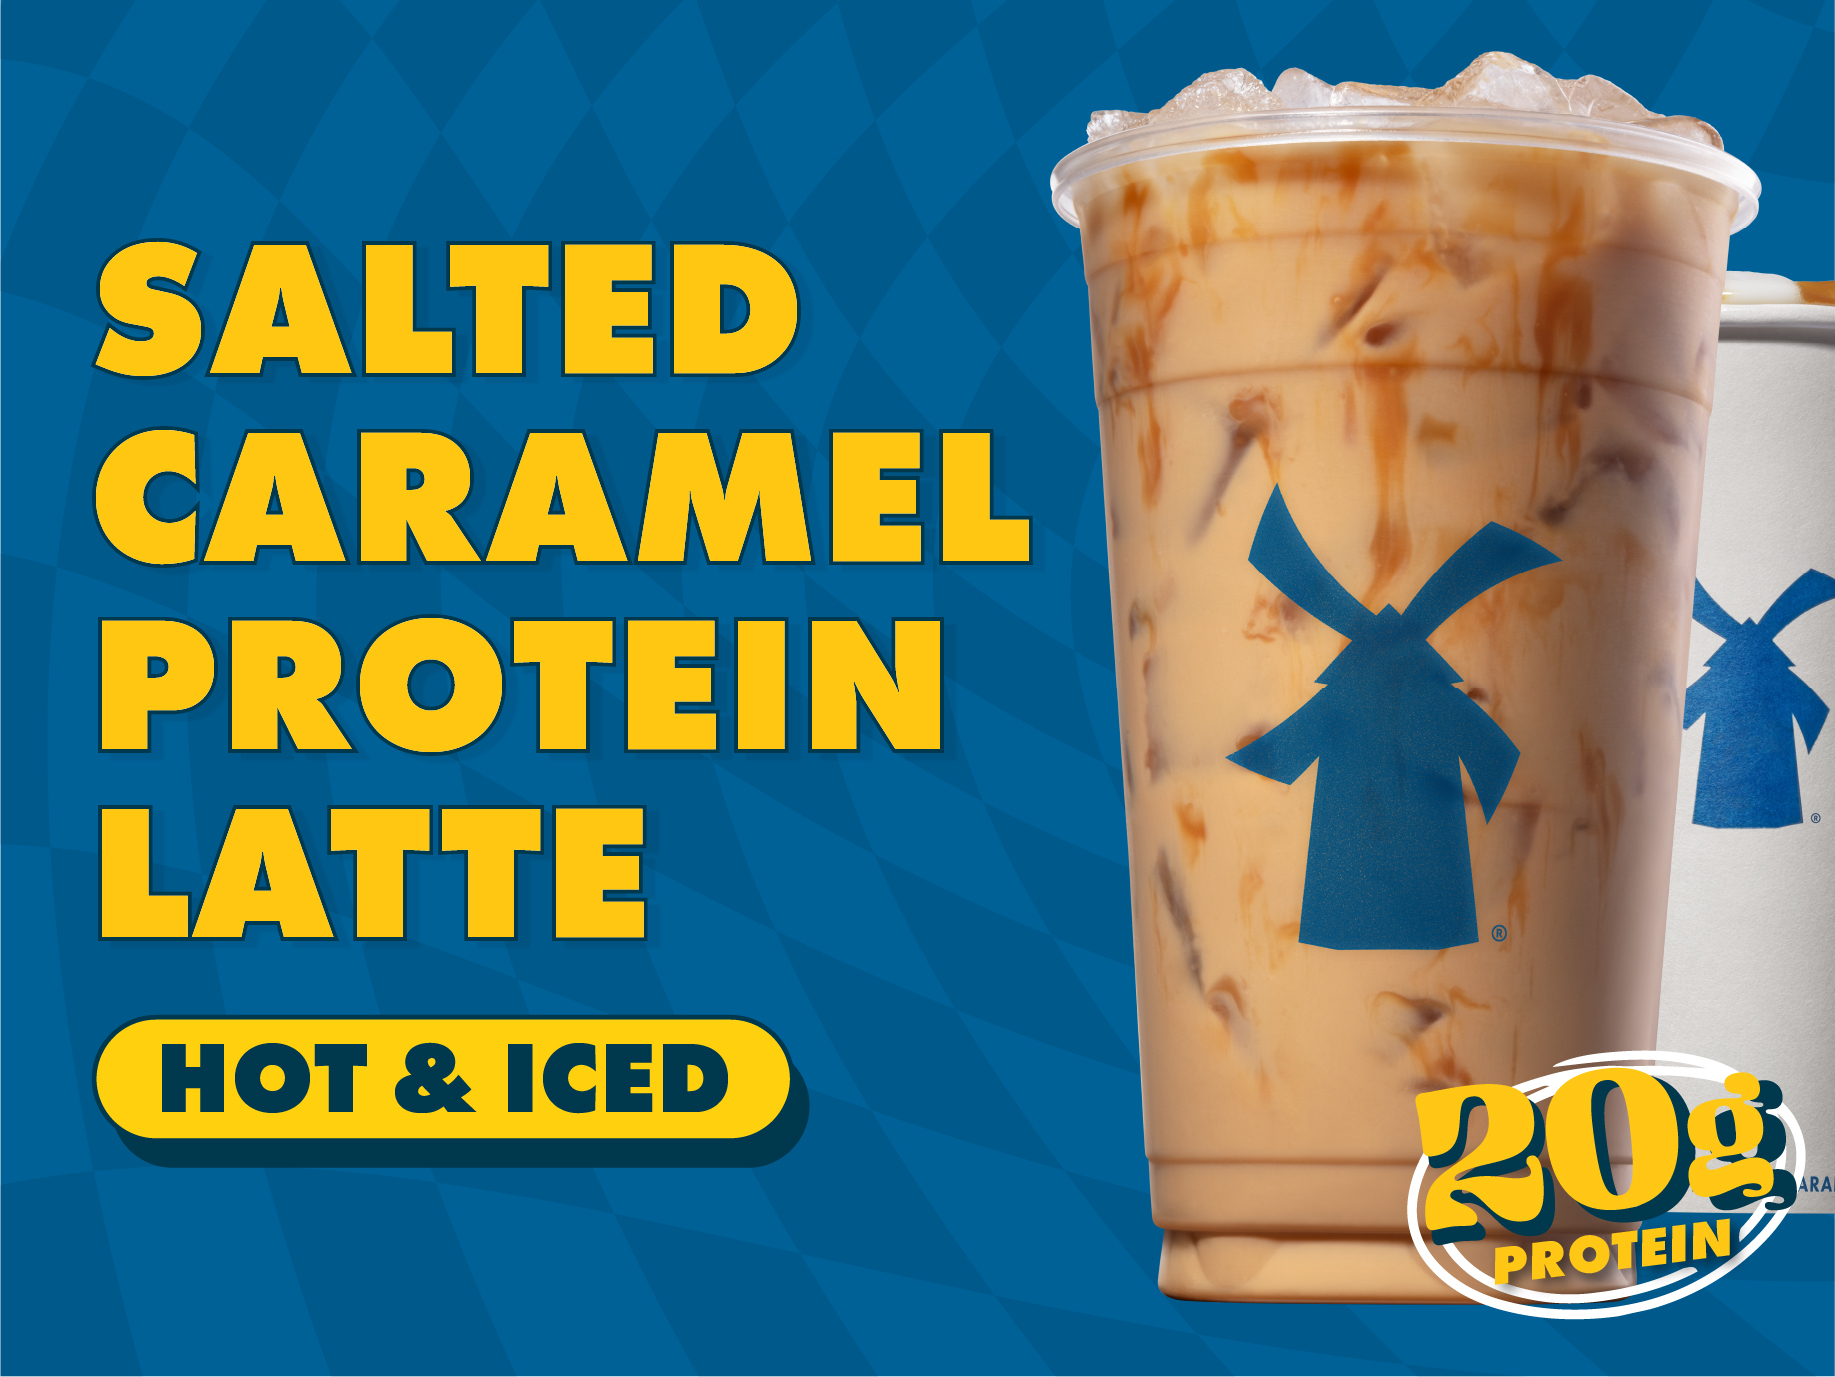 Salted caramel, protein milk, caramel drizzle